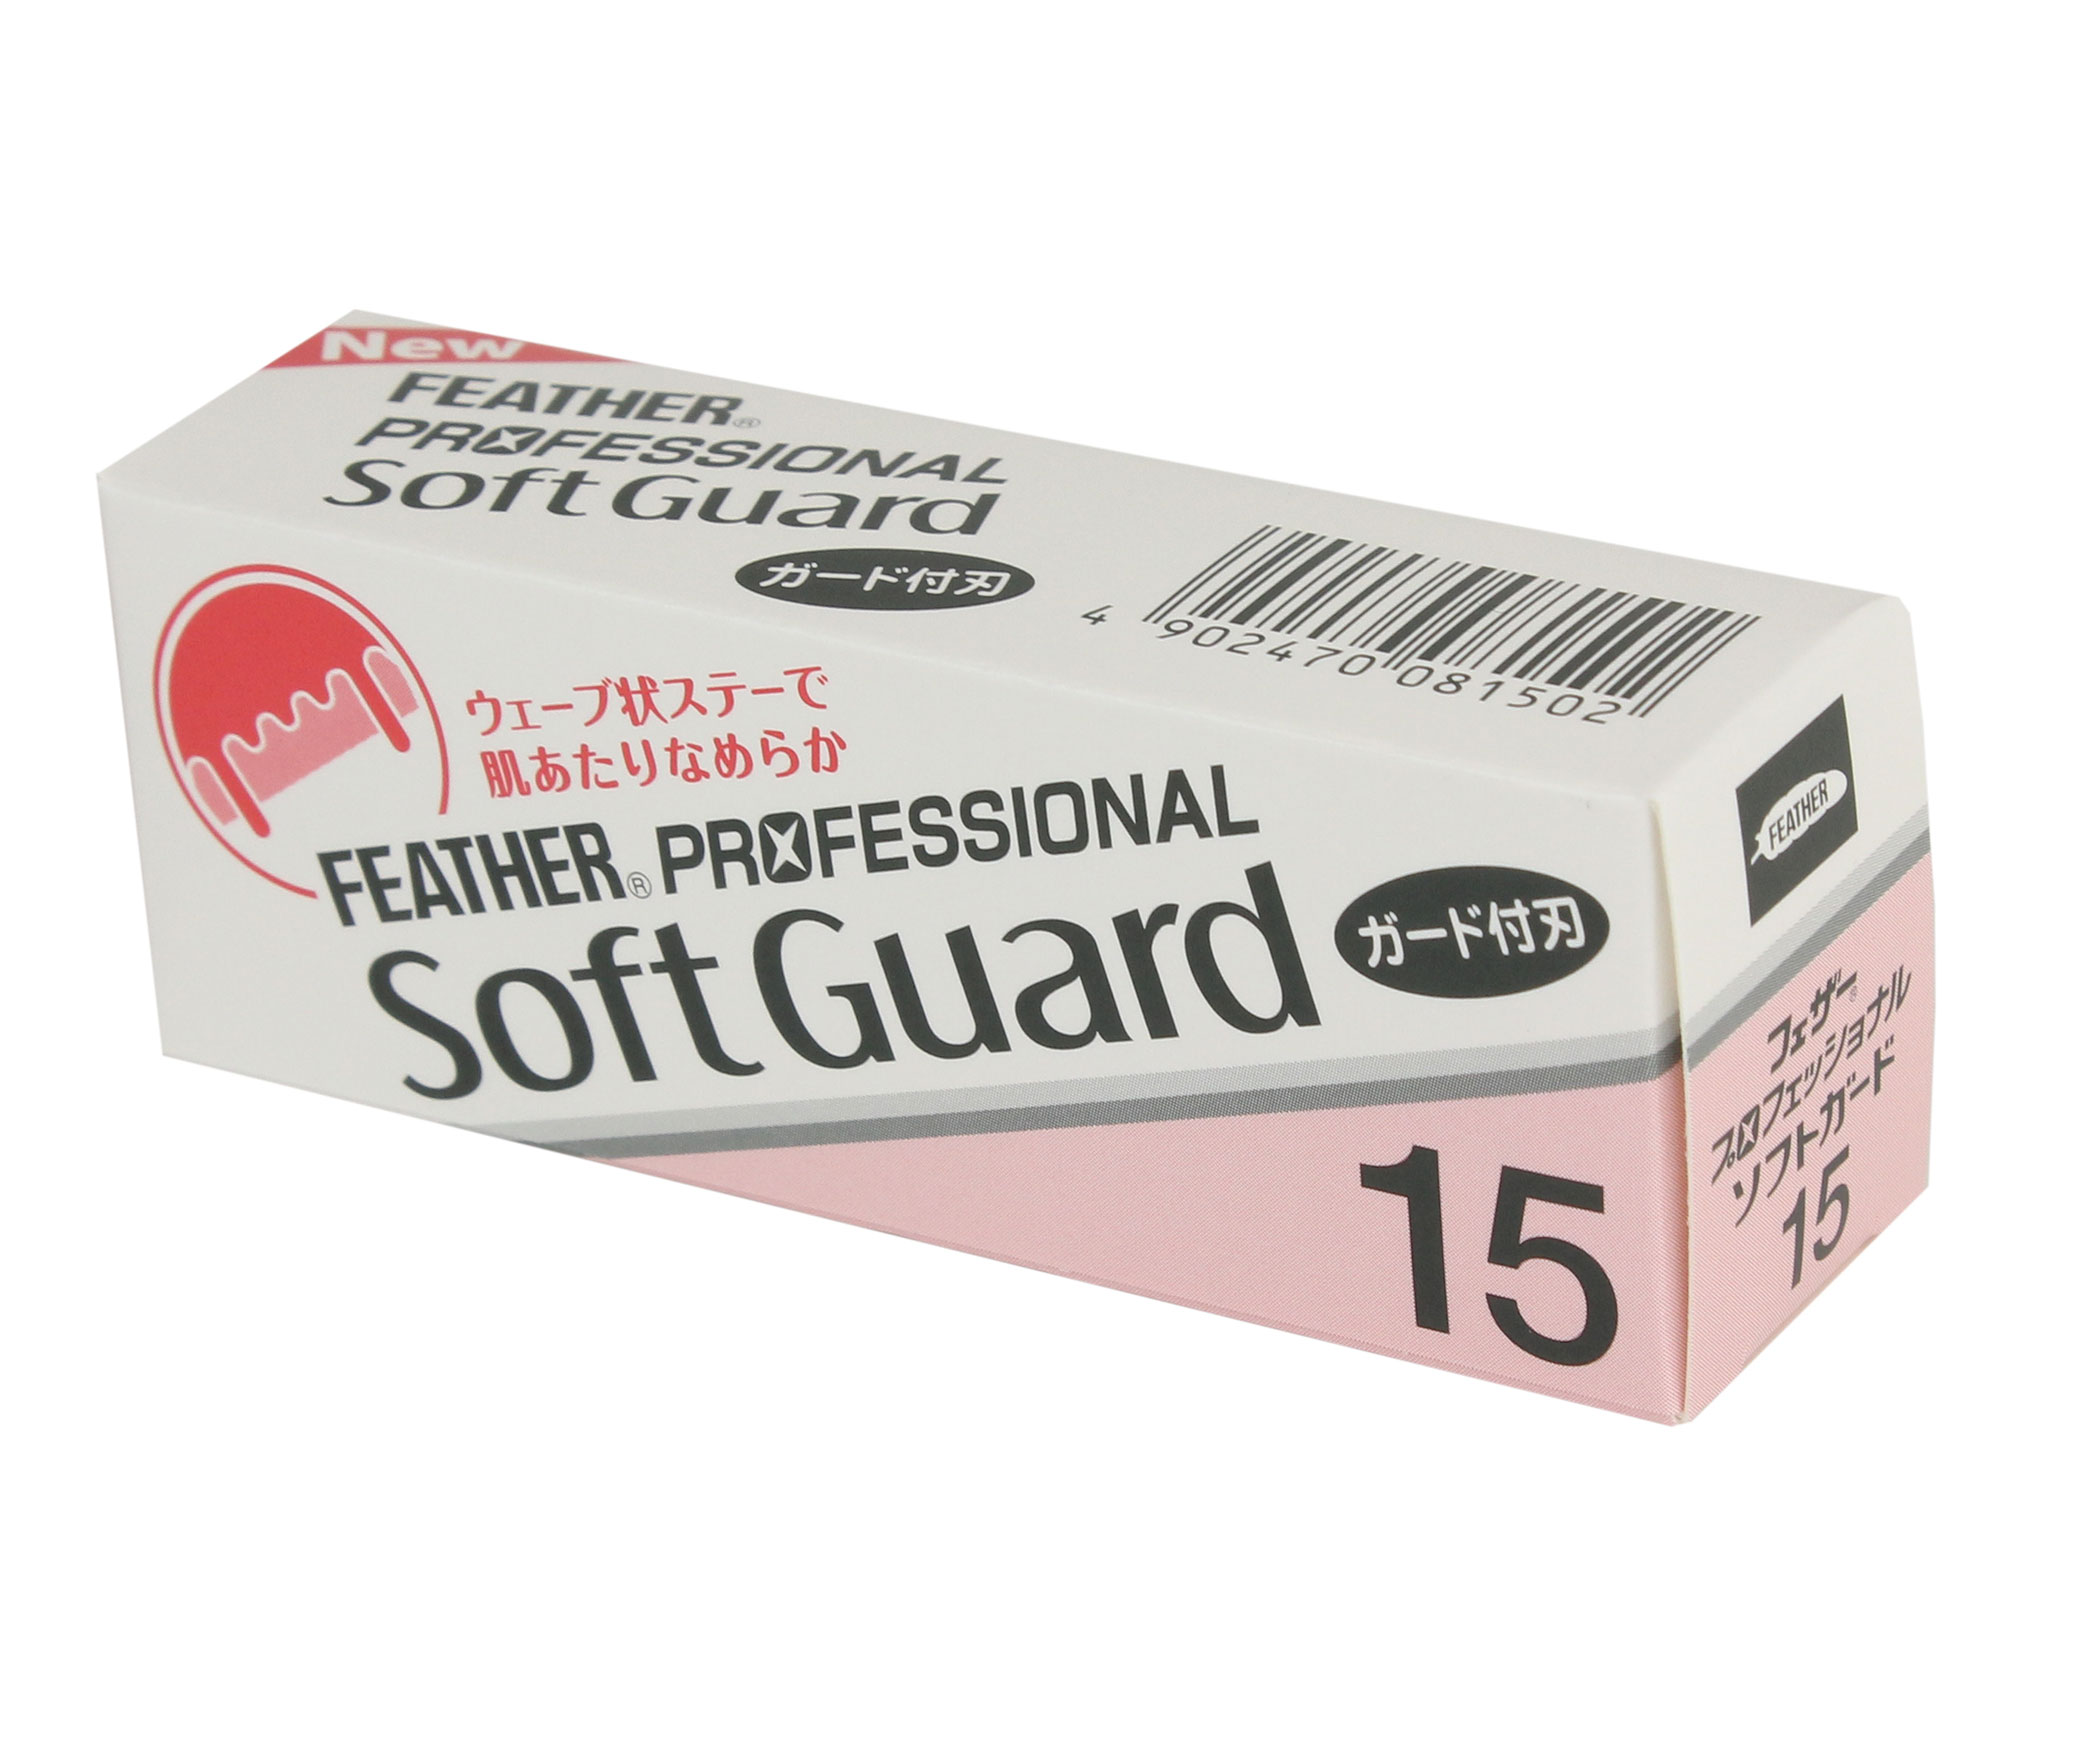 Feather Artist Club Soft Guard Blade package